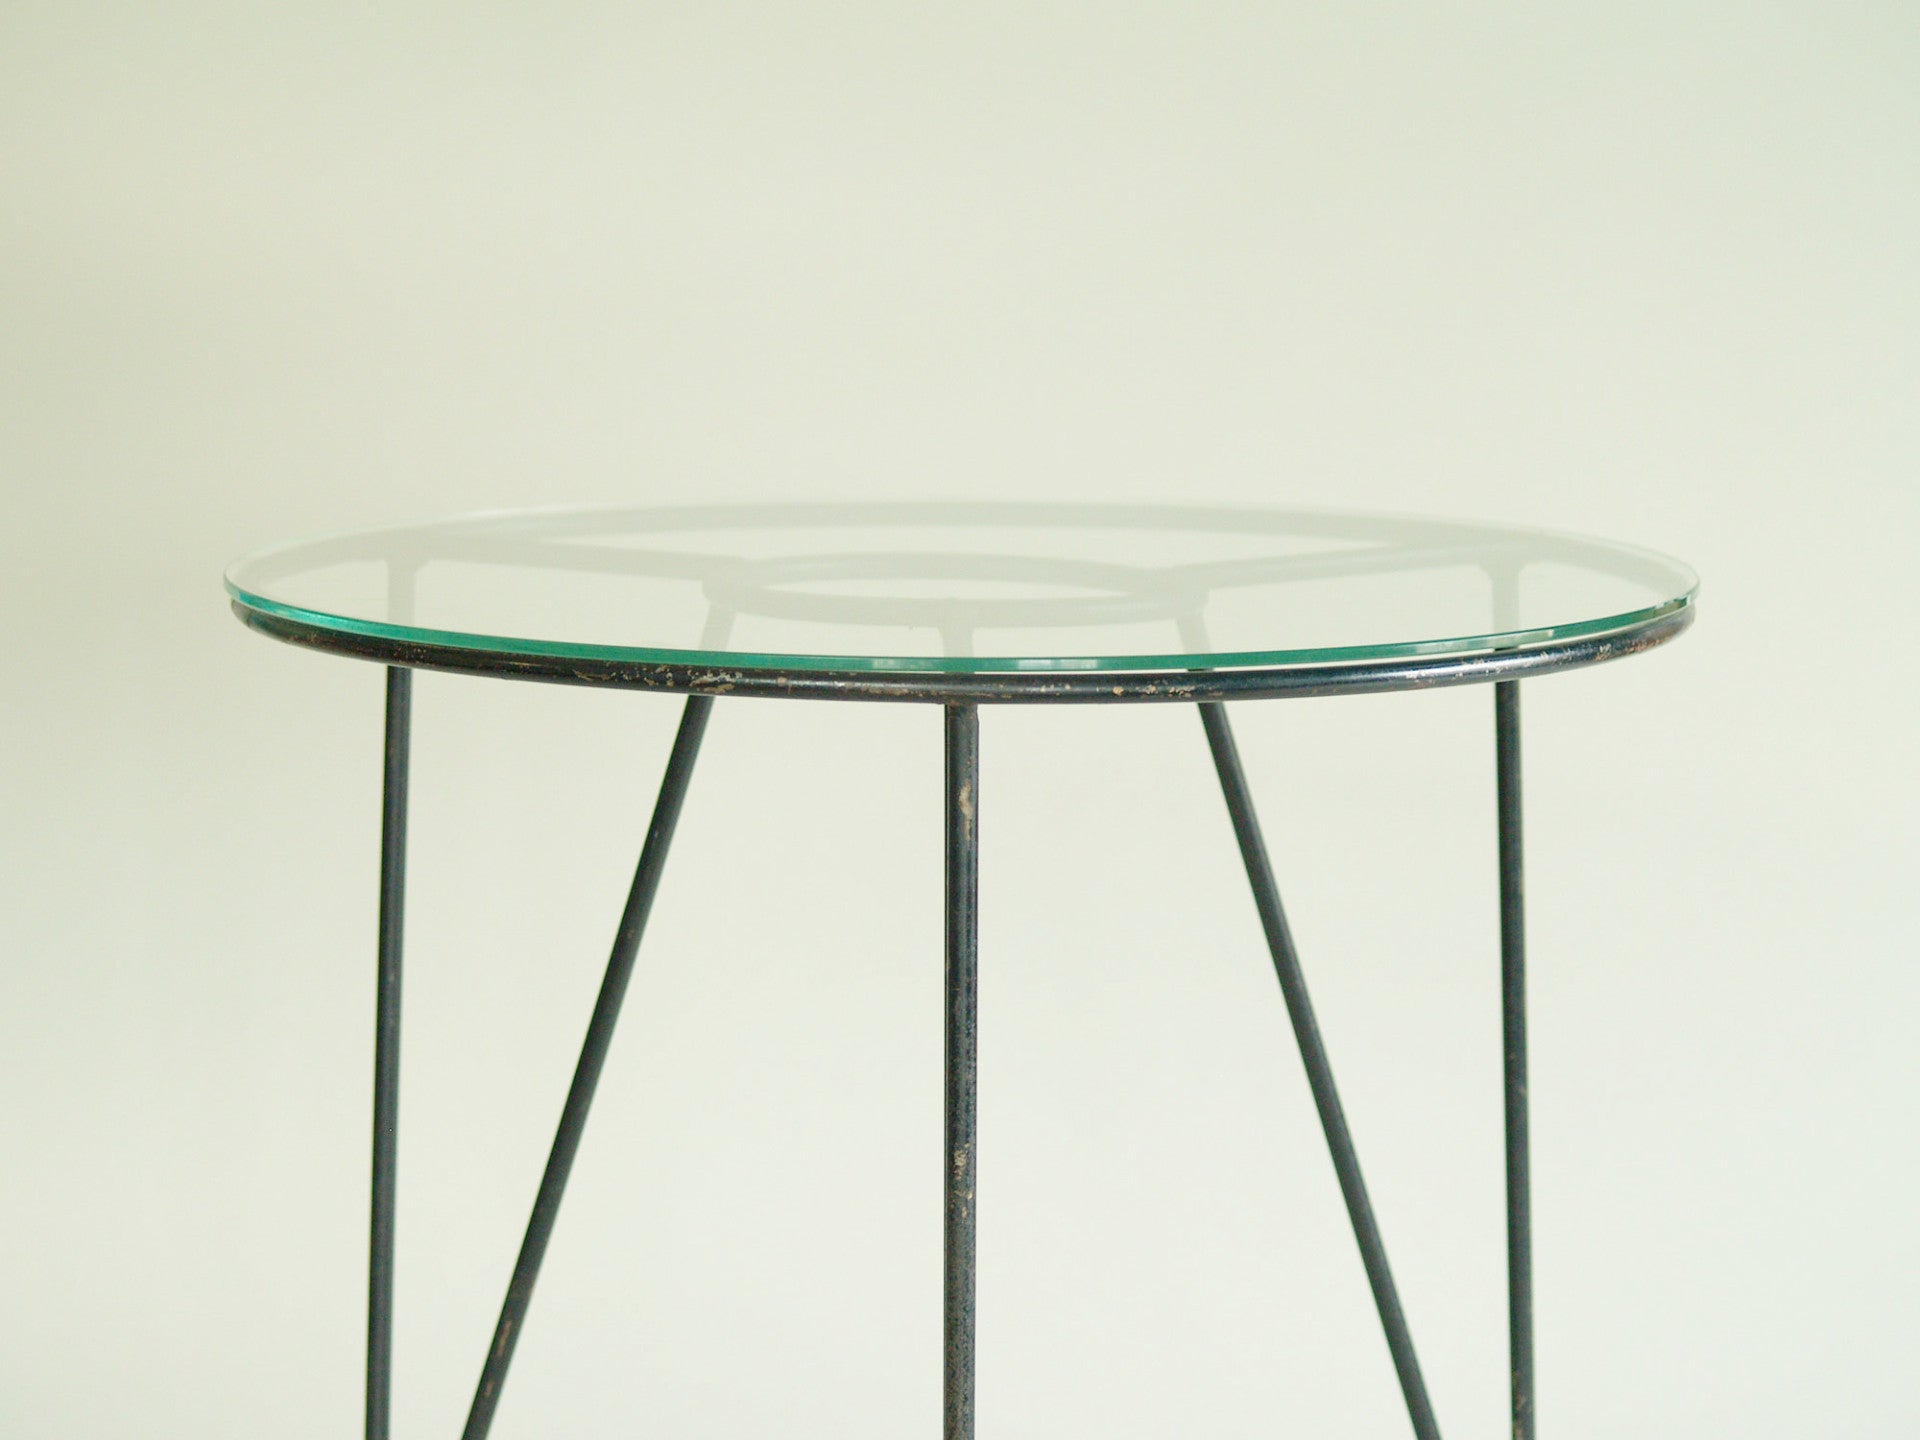 Guéridon / table basse moderniste, France (vers 1953)..Modernist occasional coffee table, France (circa 1953)